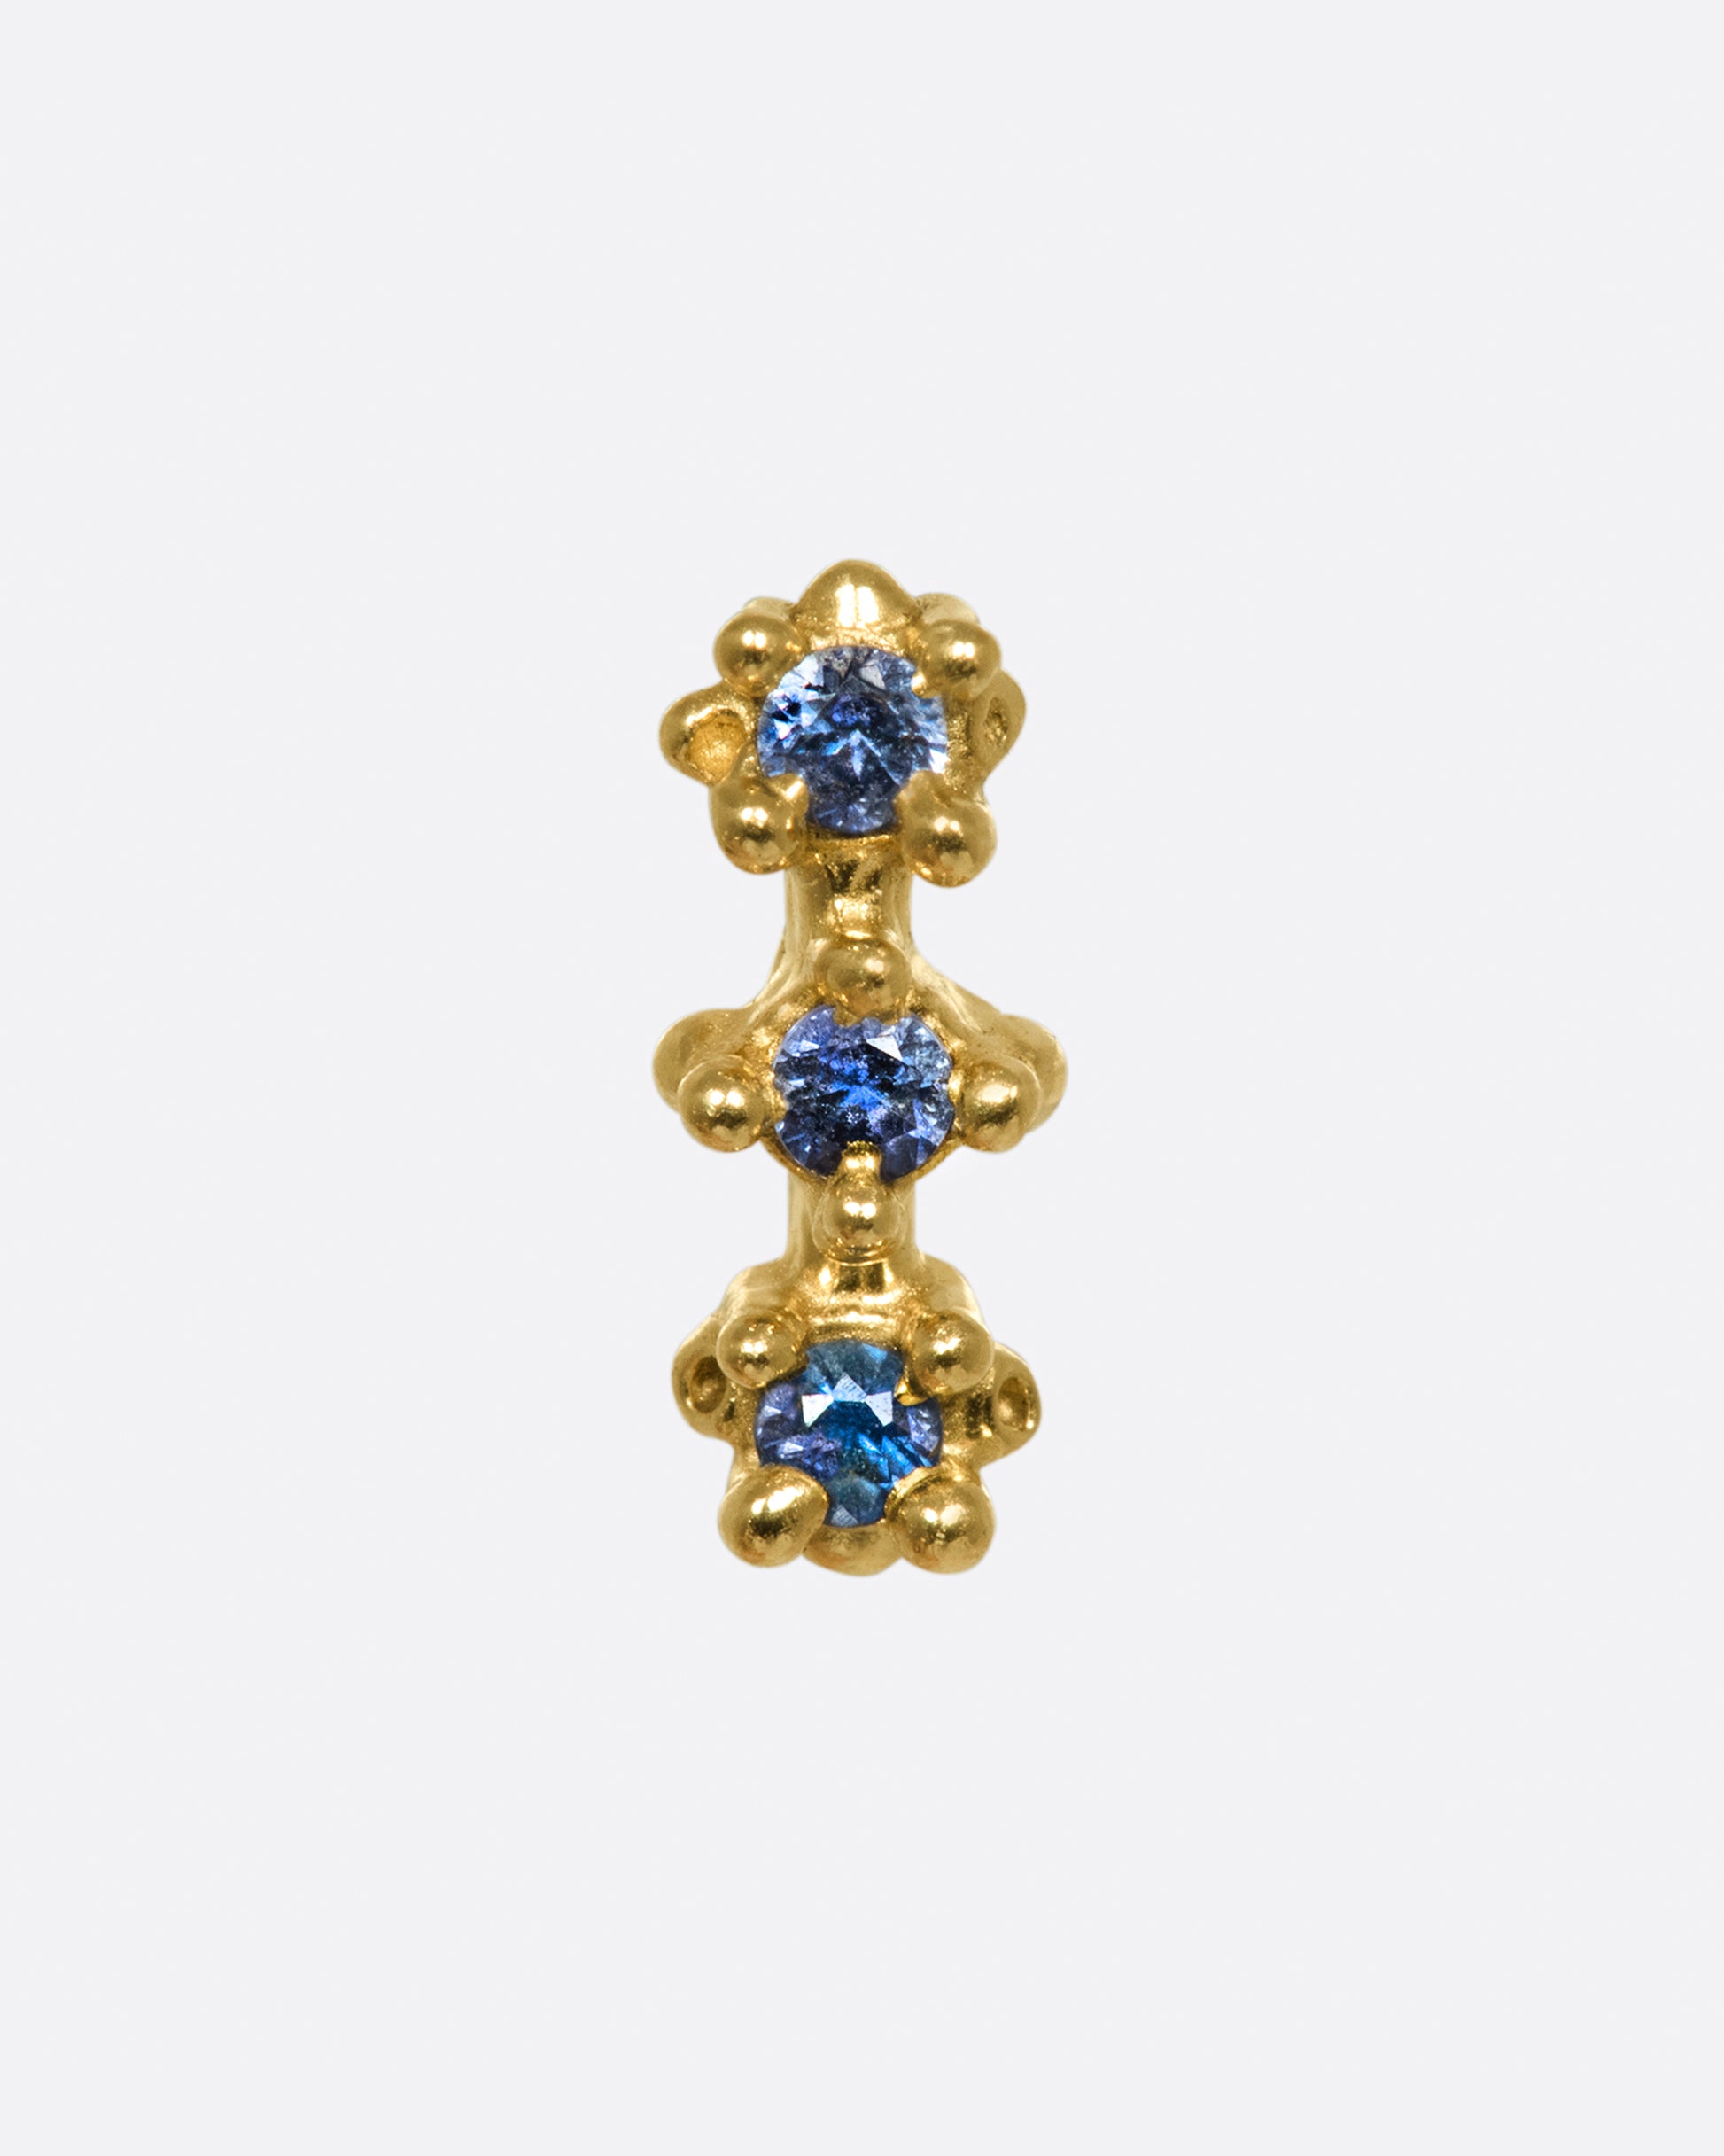 Three blue sapphires form the core of this bar stud, but their textured settings make sure that the style is anything but simple.